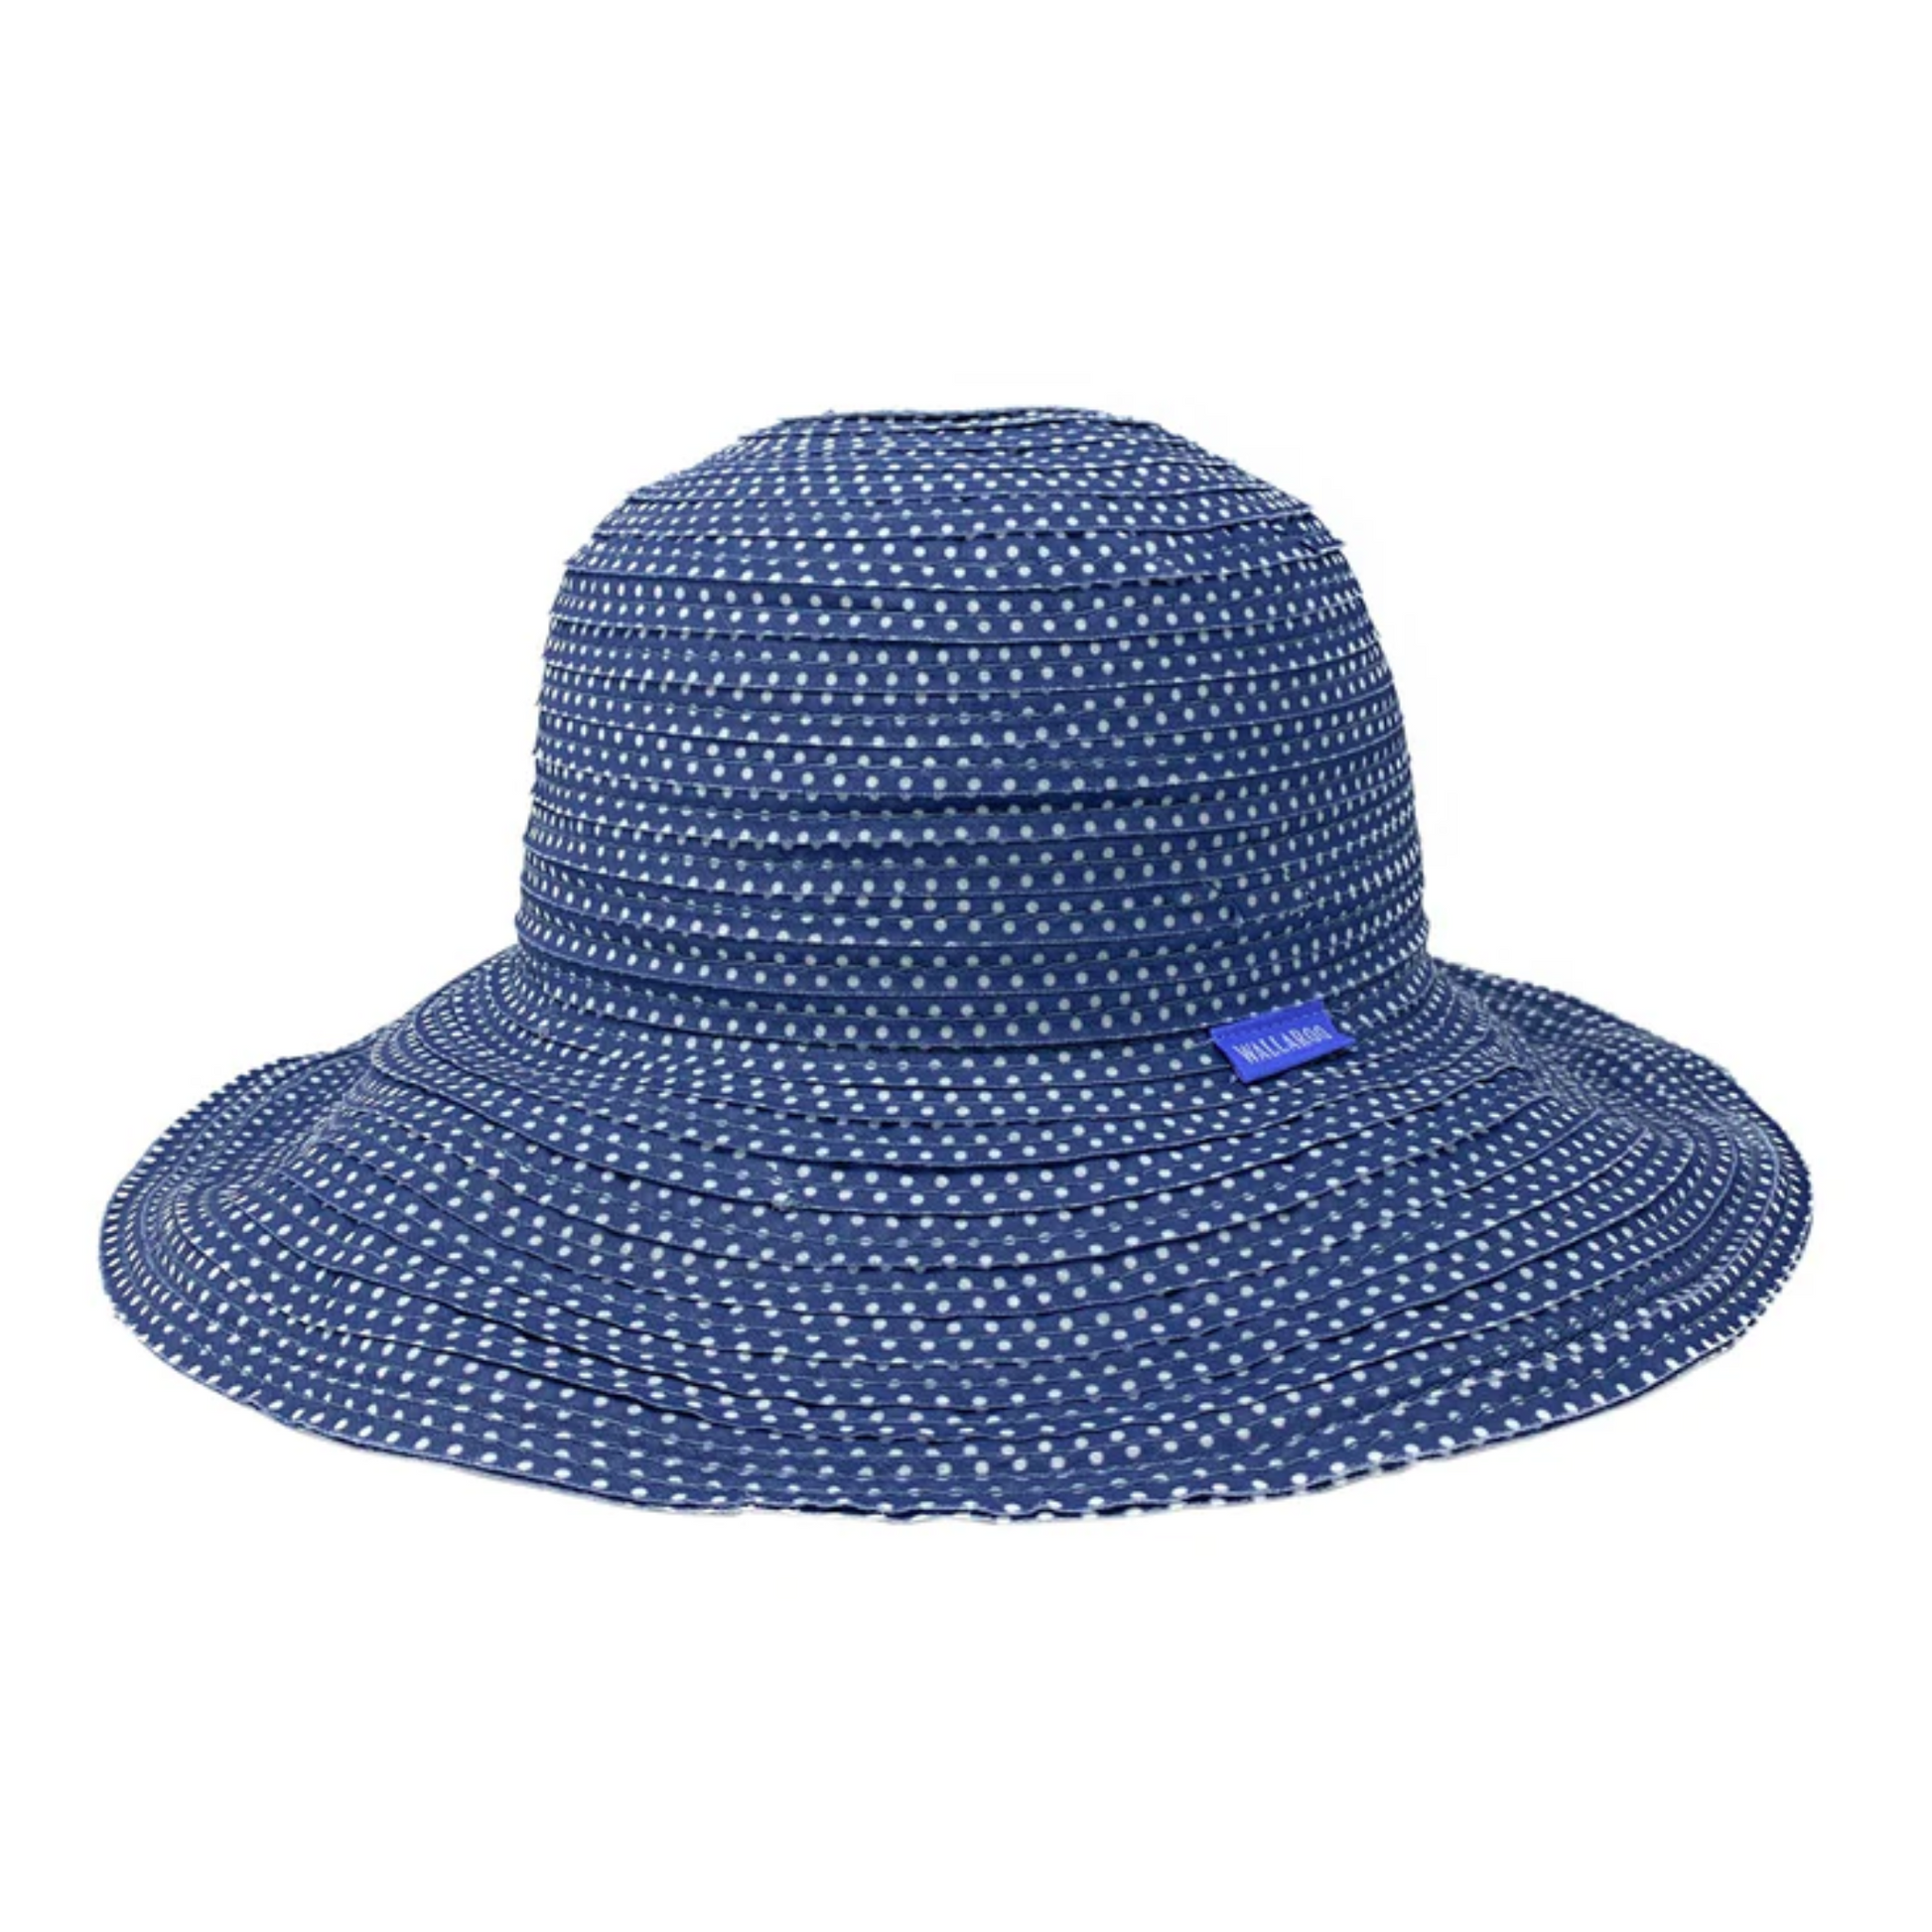 Medium blue hat with informal wrap texture and white polka dots.